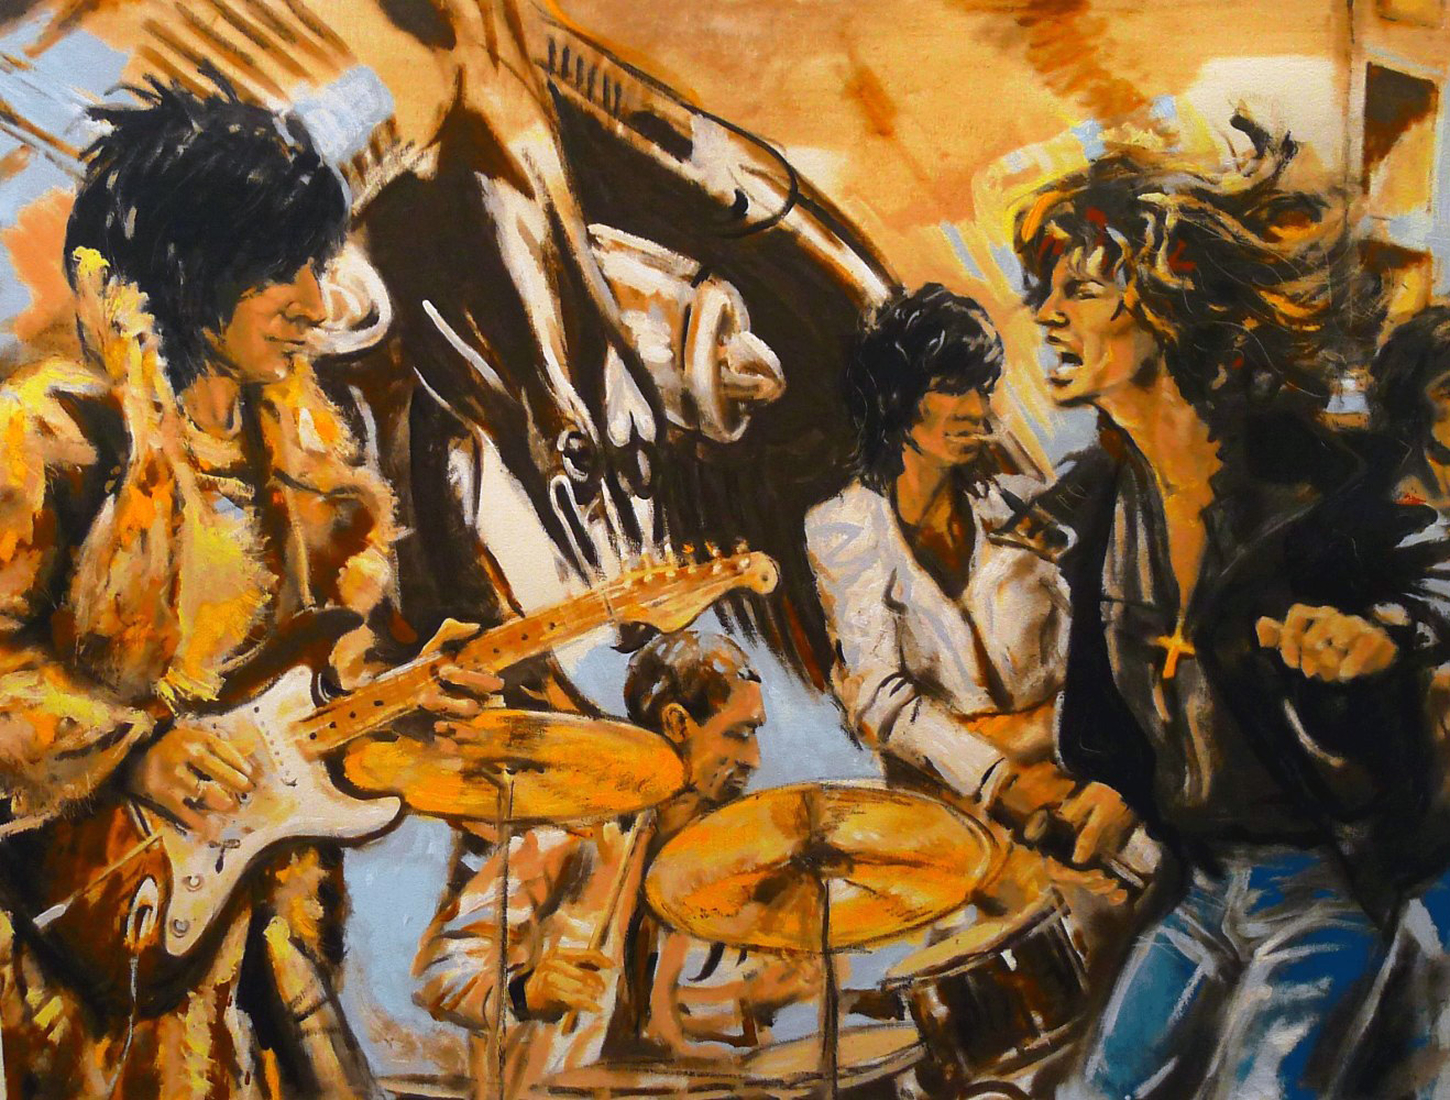 Ronnie Wood (Rolling Stones) Art for Sale